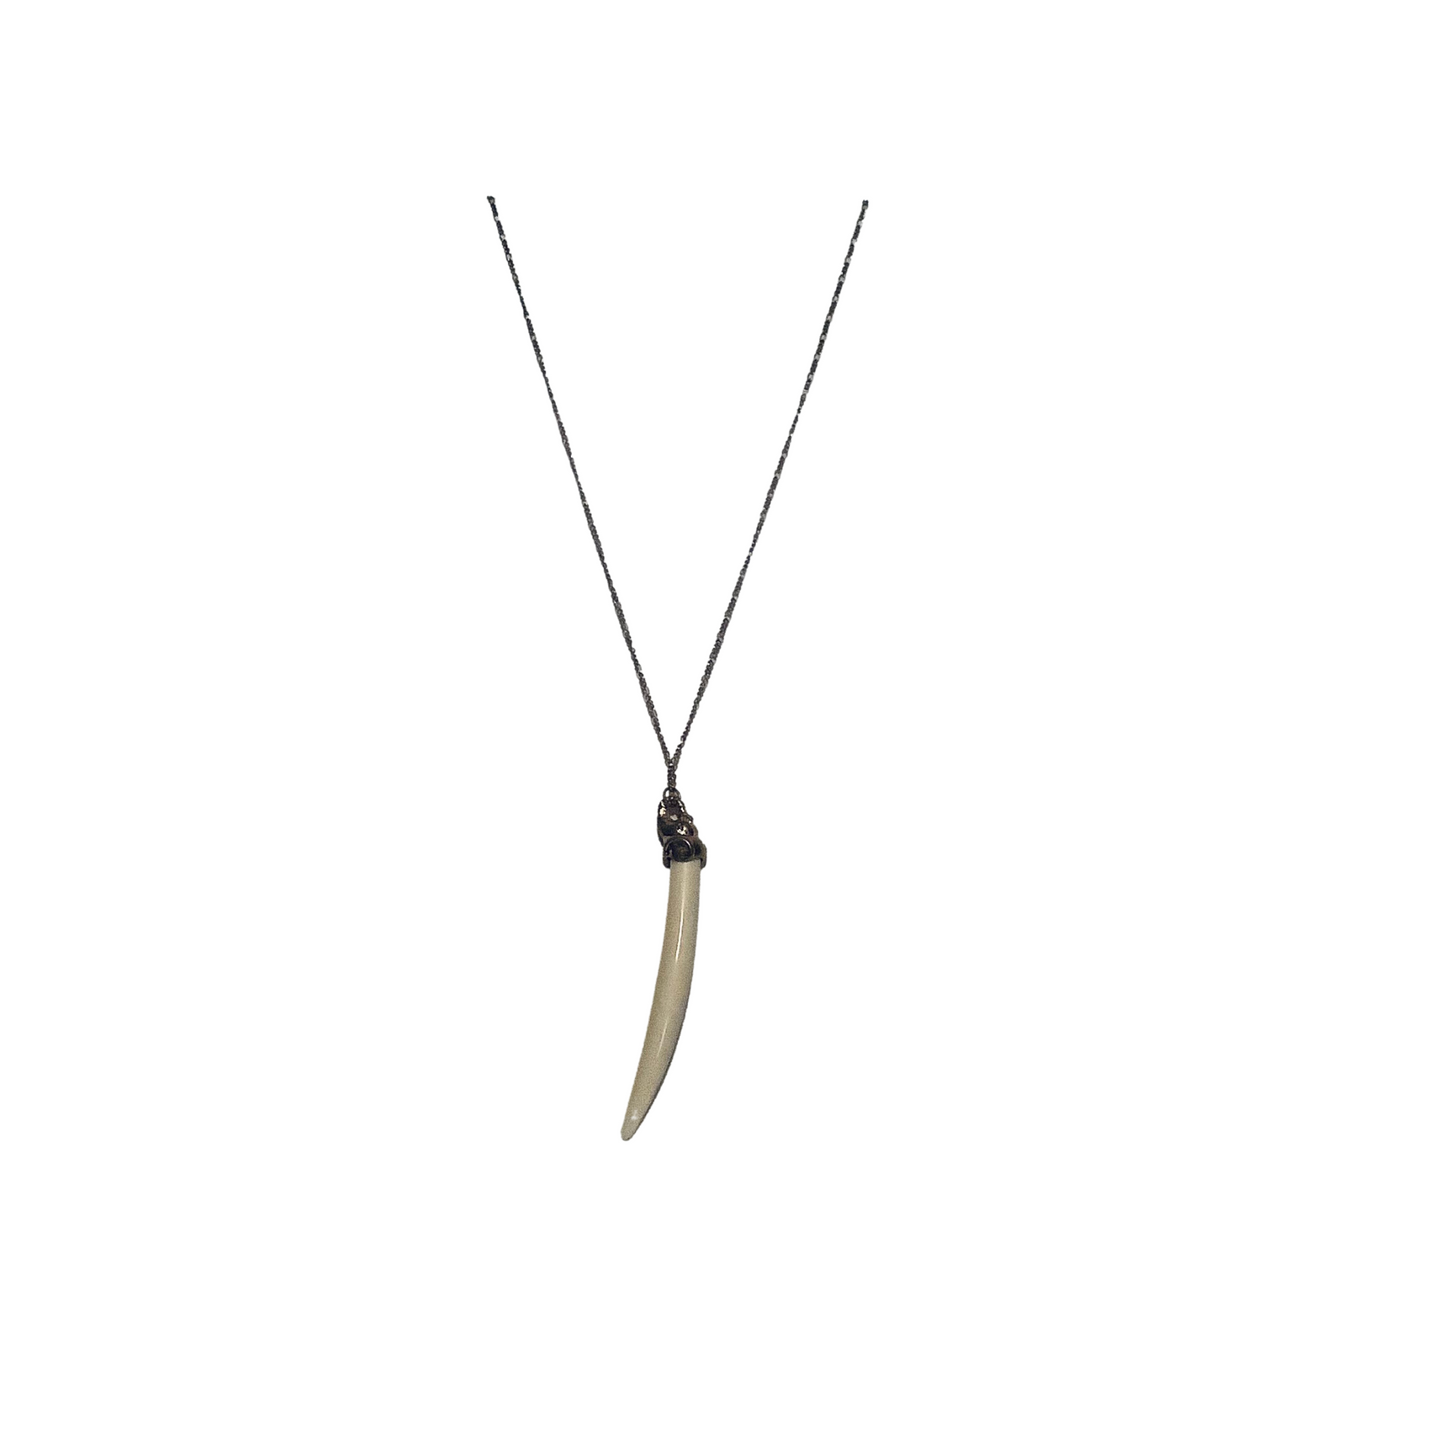 Created from silver, this long necklace features a unique bone pendant which adds a unique and sophisticated style. Its tastefully positioned pendant and long length will make any outfit look stylish and high-end.